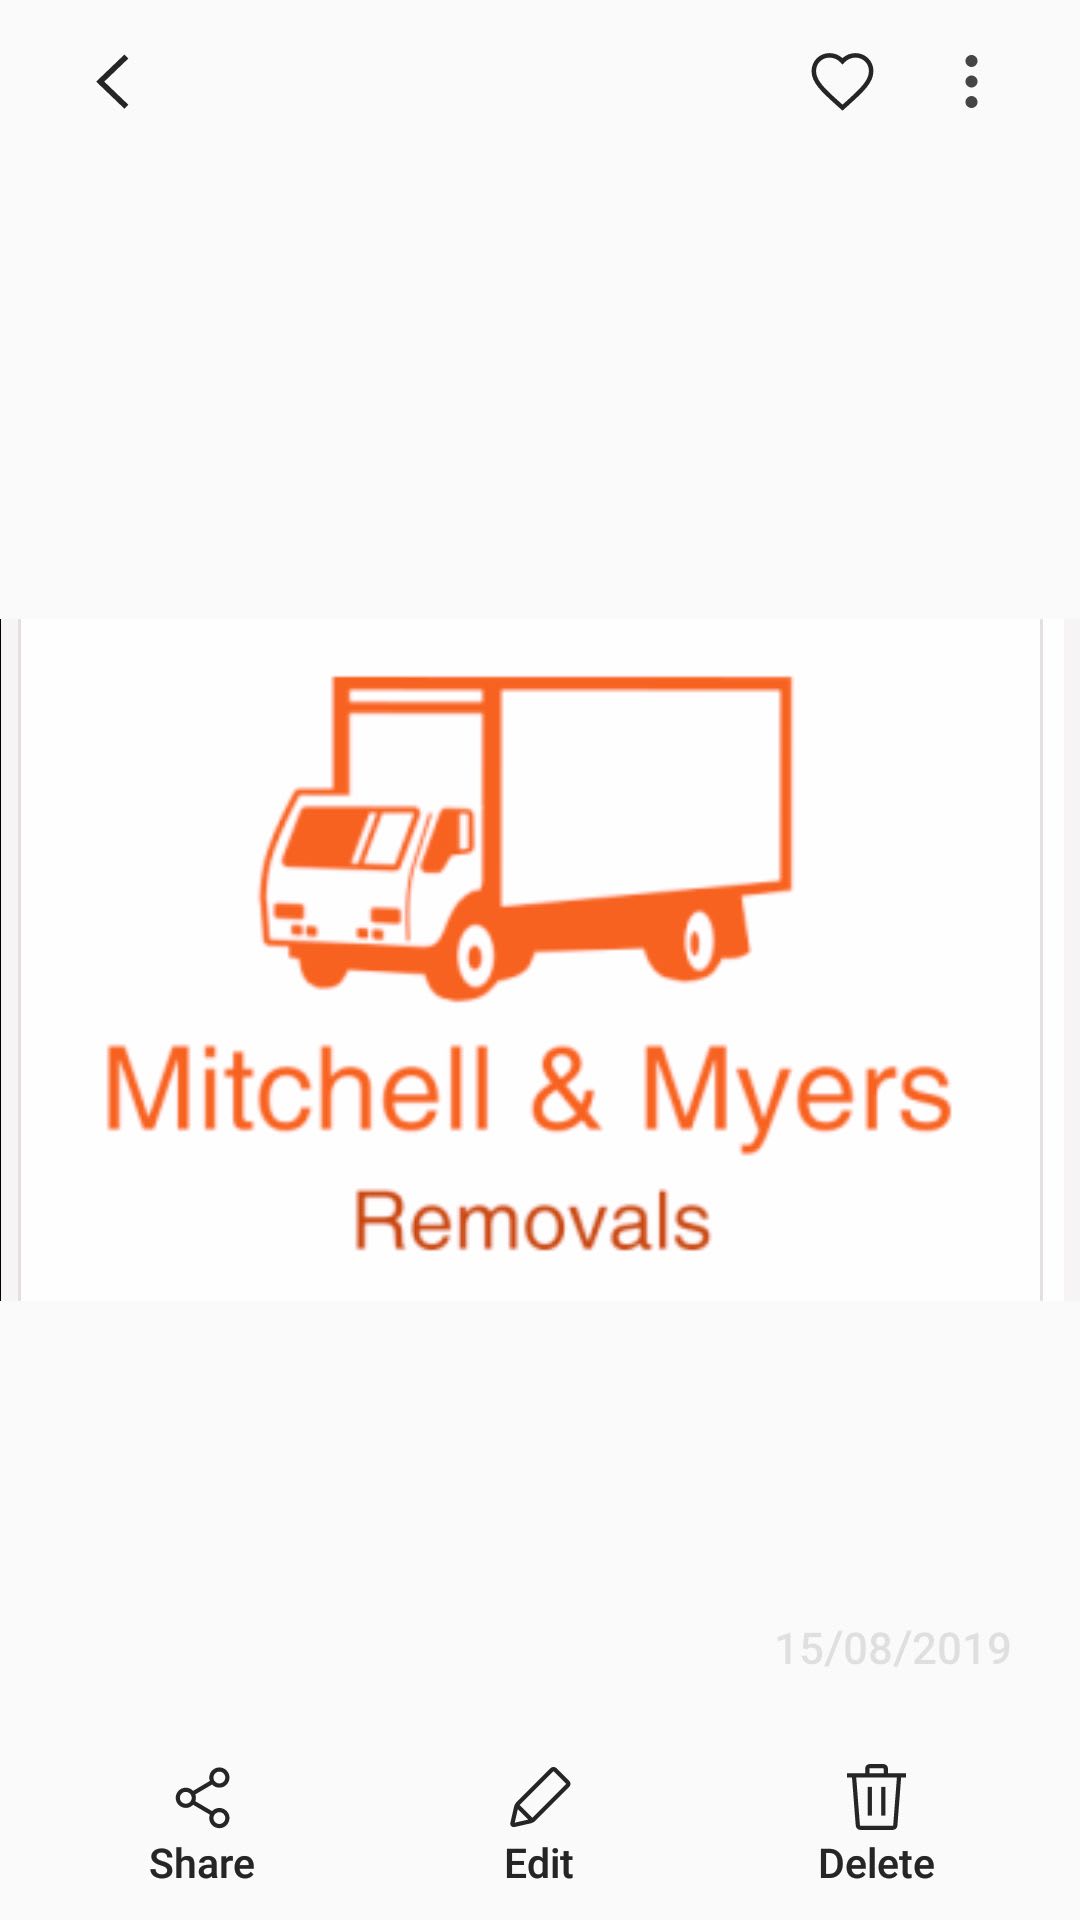 Mitchell & Myers Removals